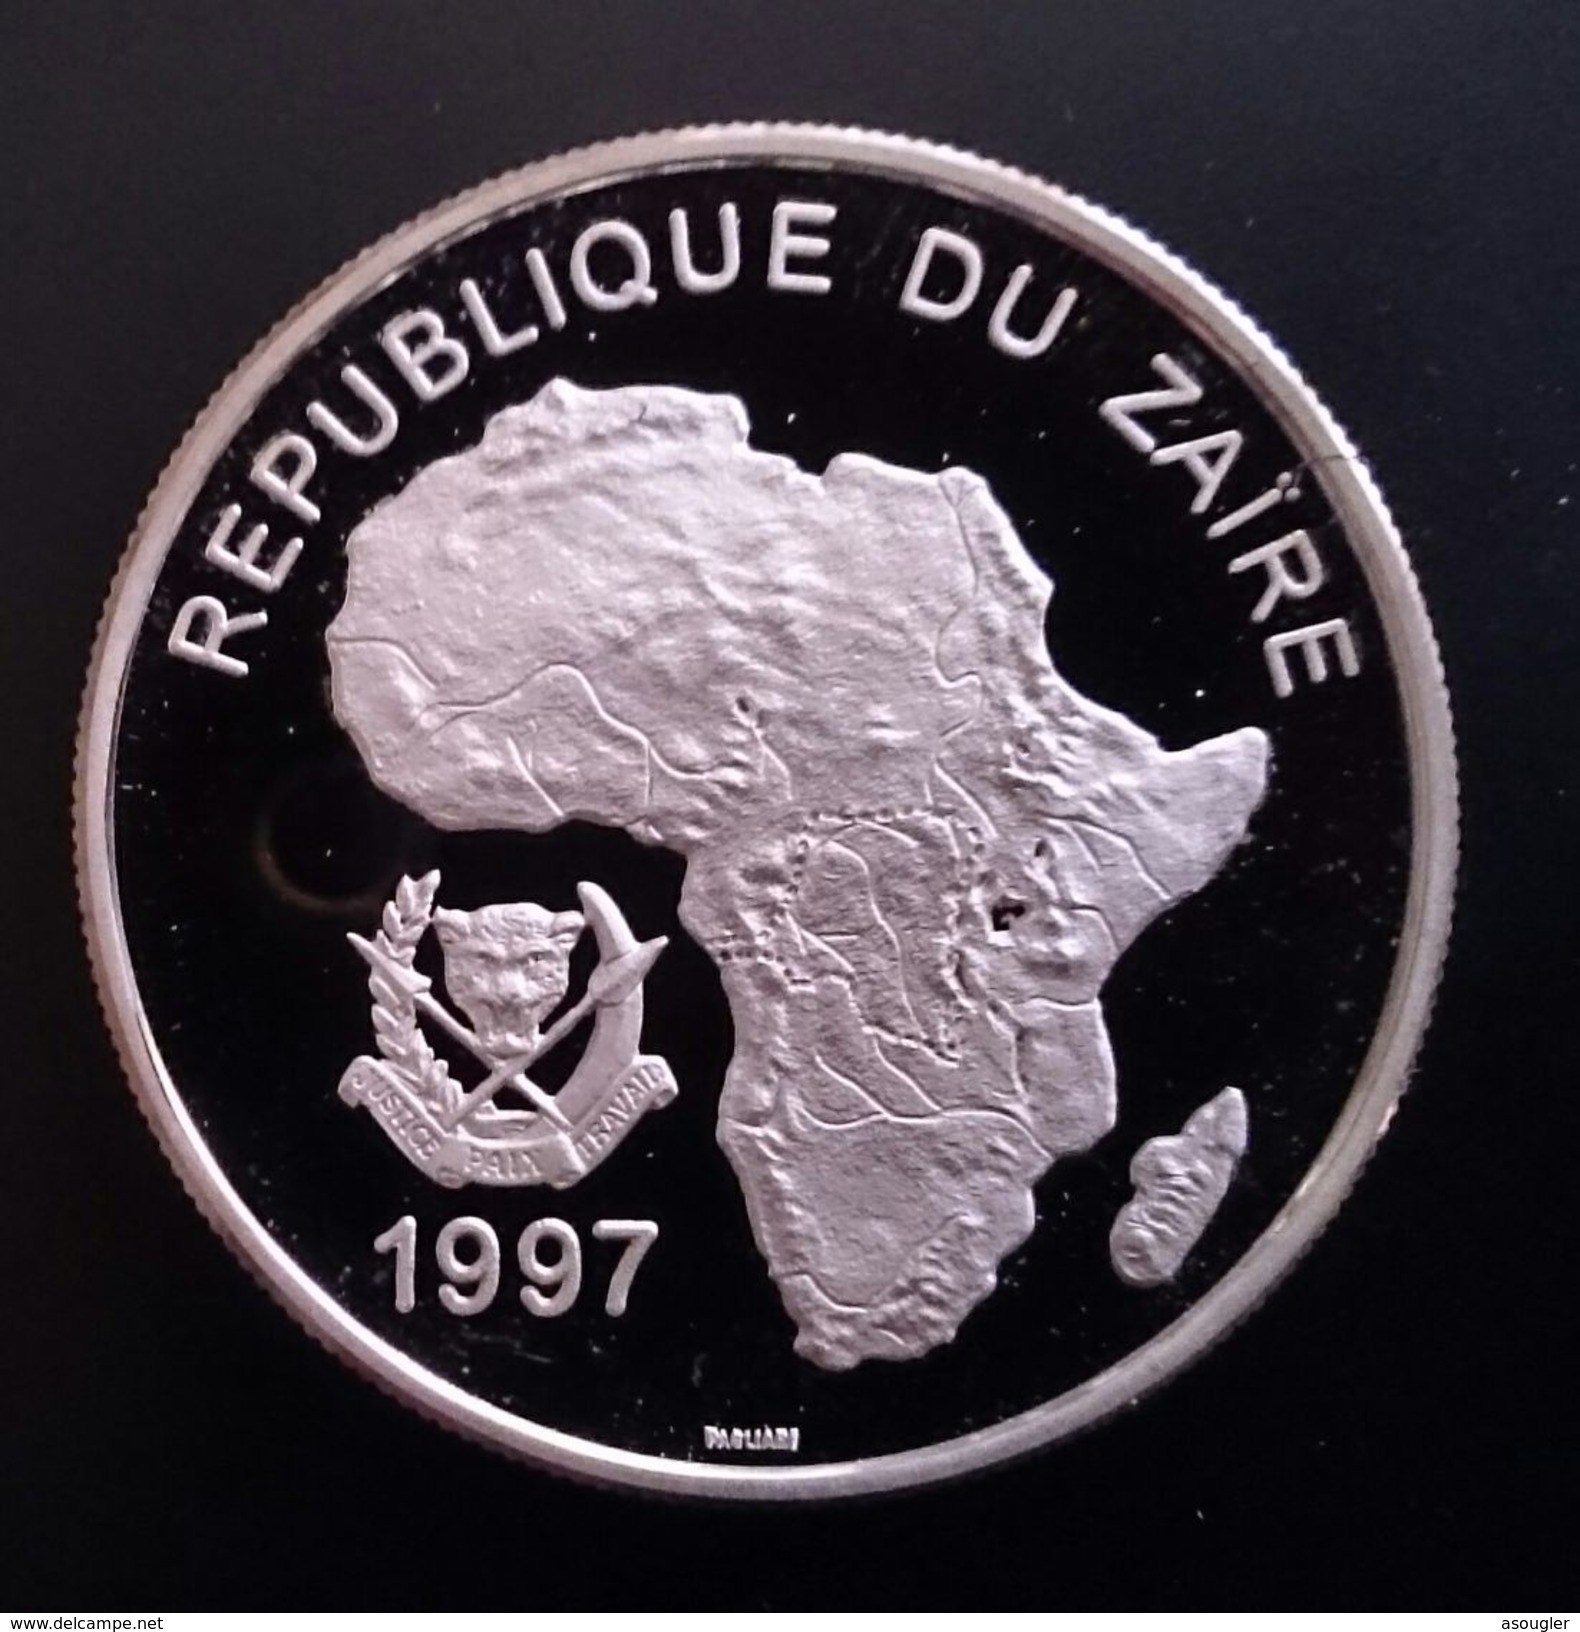 ZAIRE 1000 NOUVEAUX ZAIRES 1997 SILVER PROOF "Wildlife Of Africa" Free Shipping Via Registered Air Mail - Zaïre (1971-97)